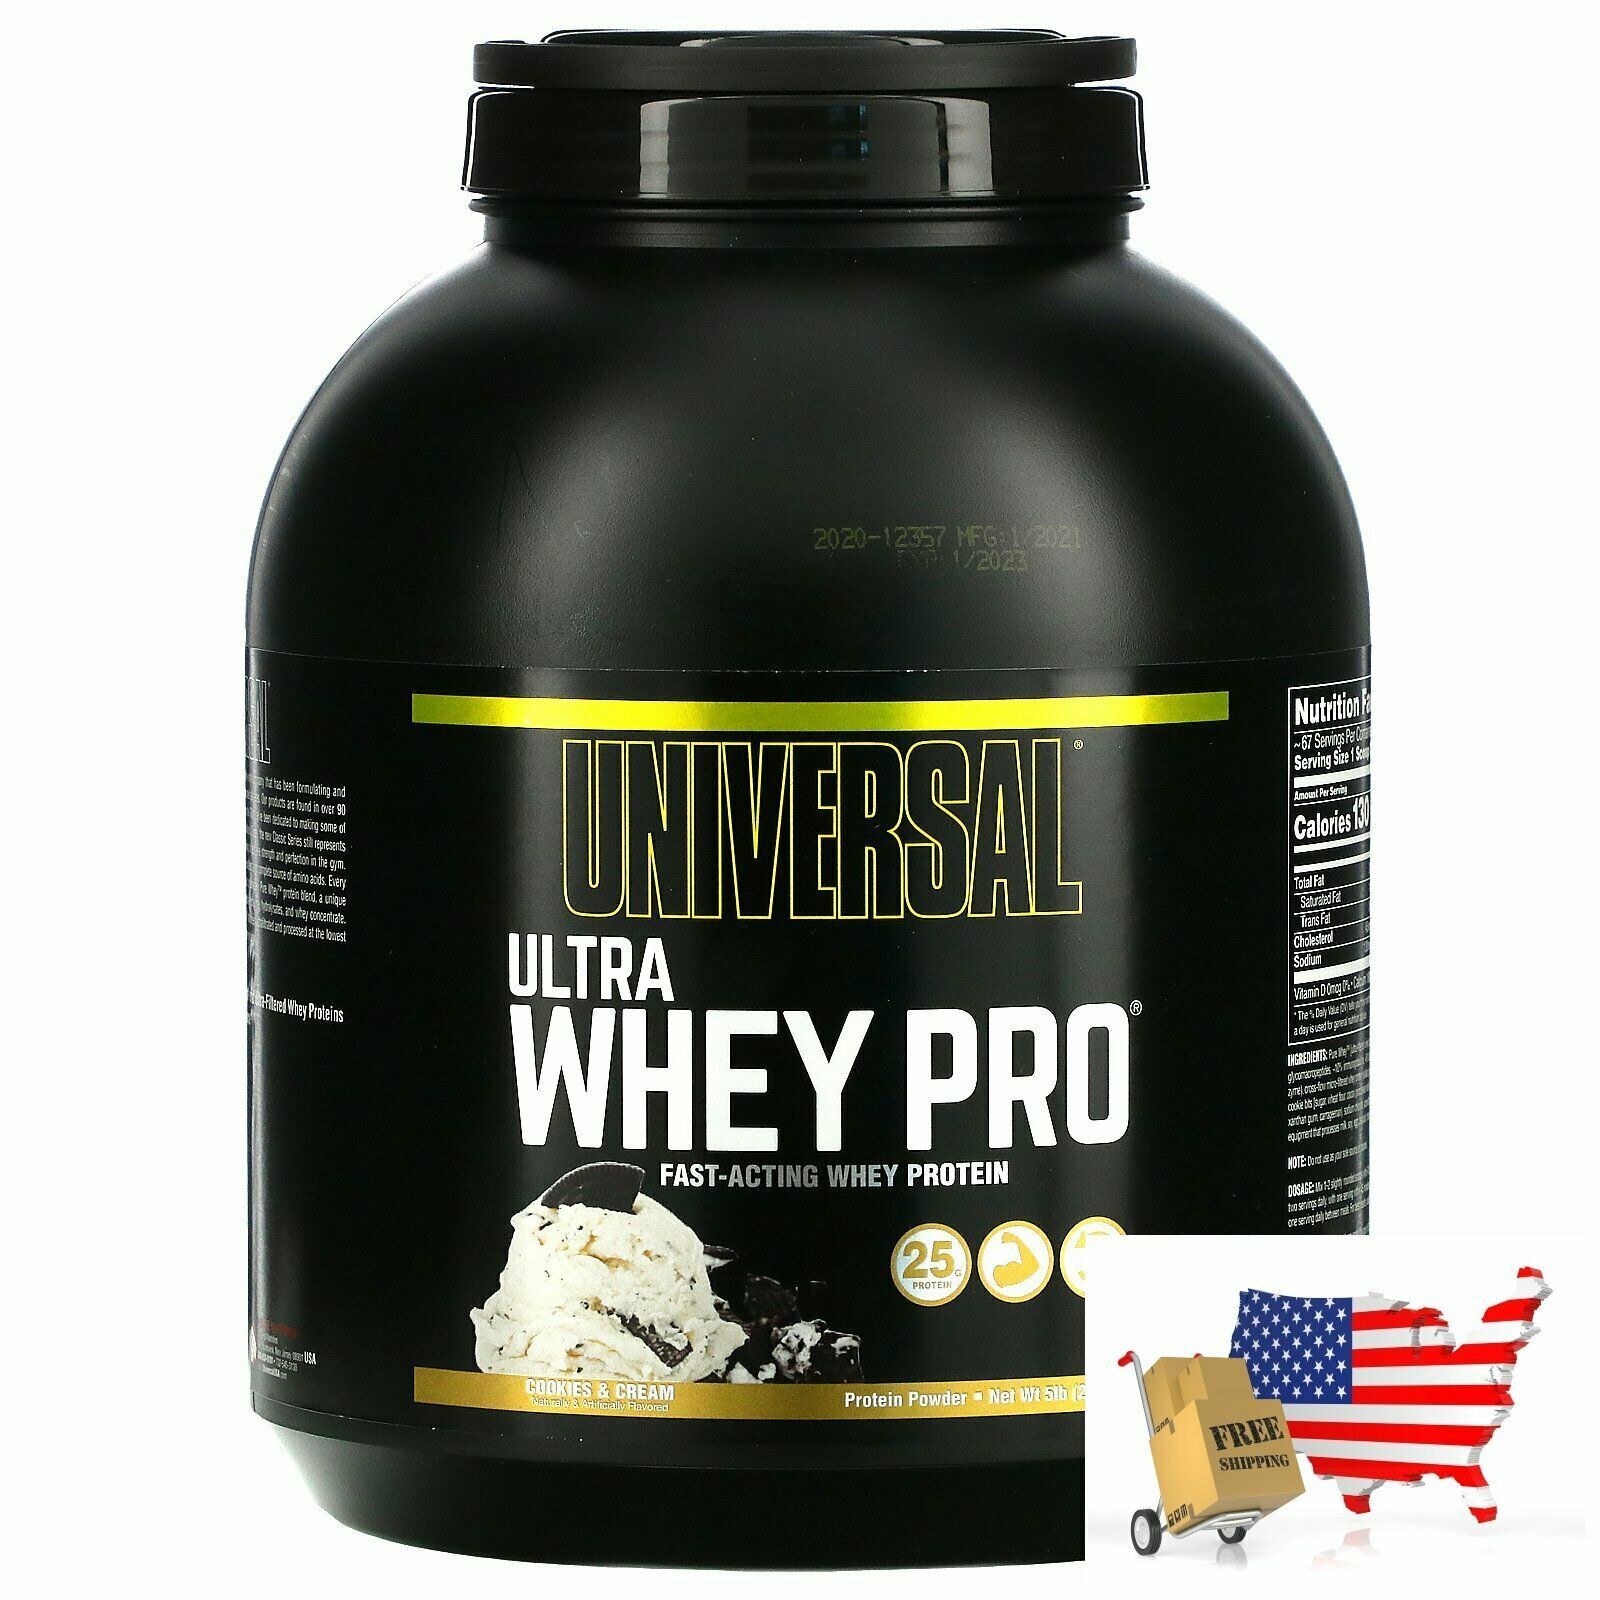 Primary image for Universal Nutrition, Ultra Whey Pro, Protein Powder, Cookies & Cream, 5 lb (2.27